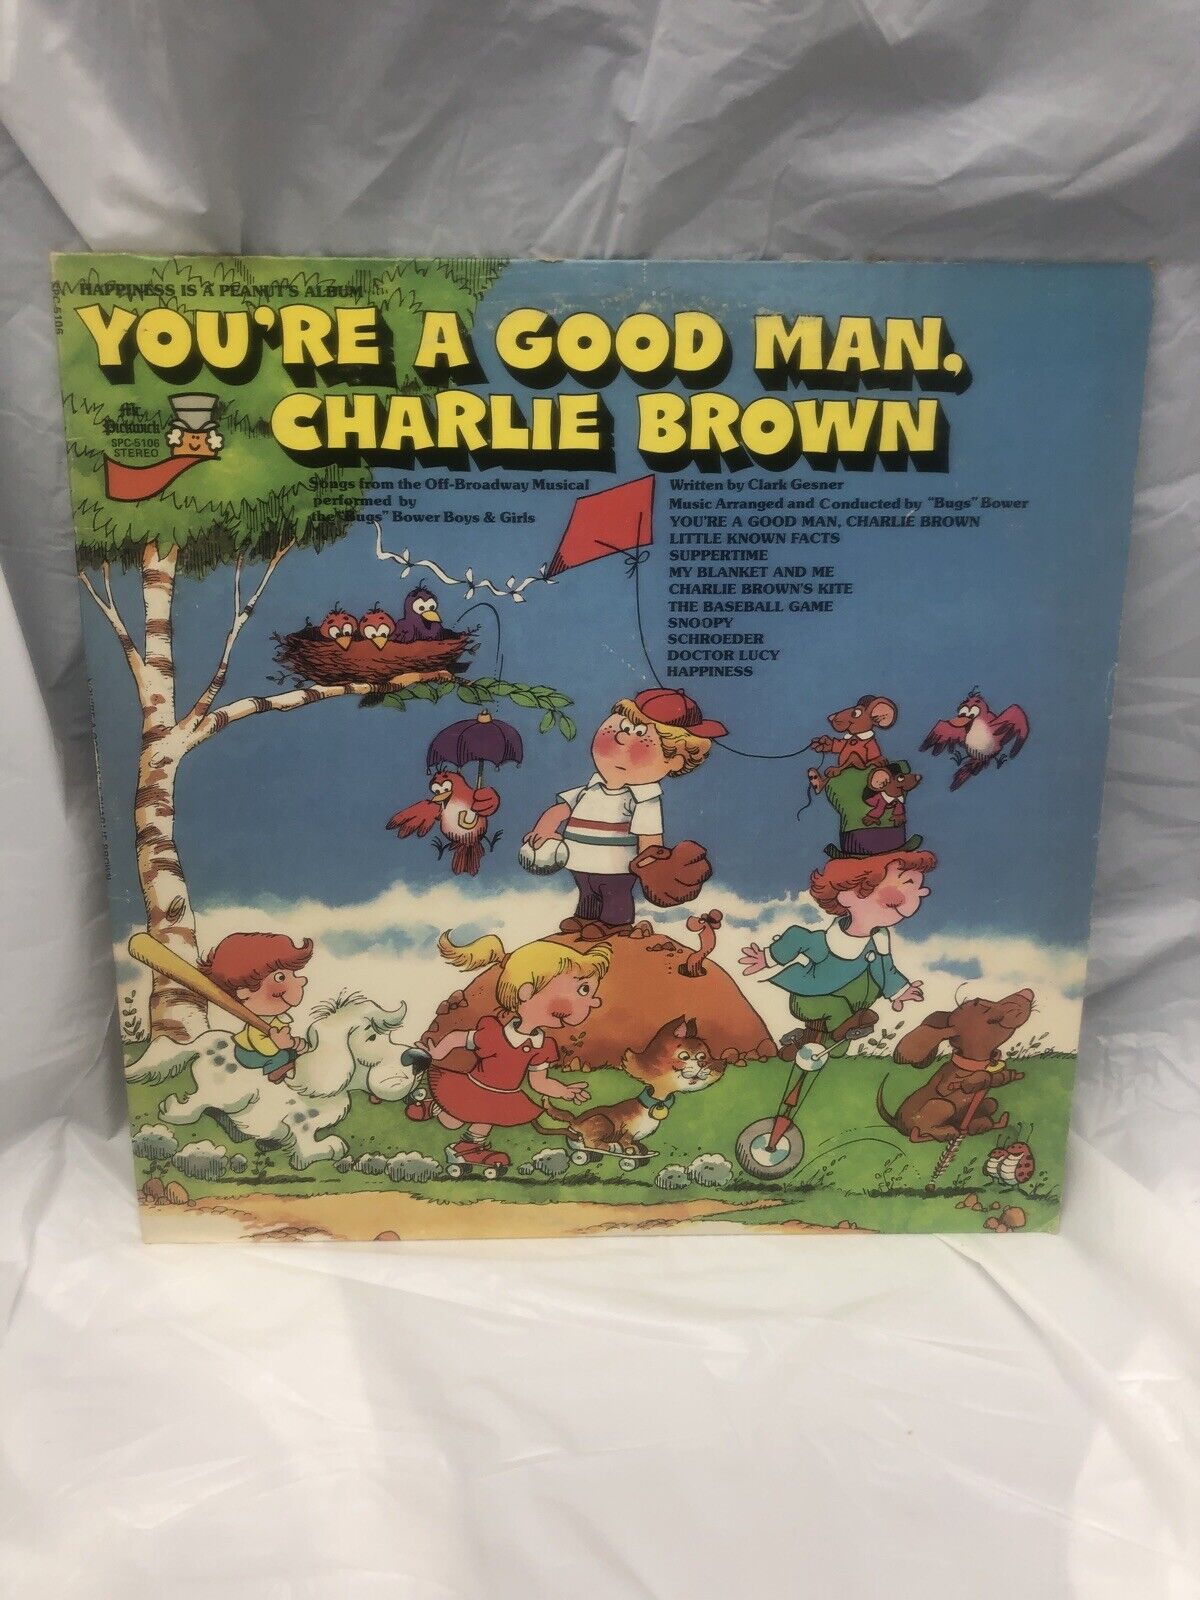 VTG 33 1/3 You're A Good Man Charlie Brown The Peanuts Album Record 1974